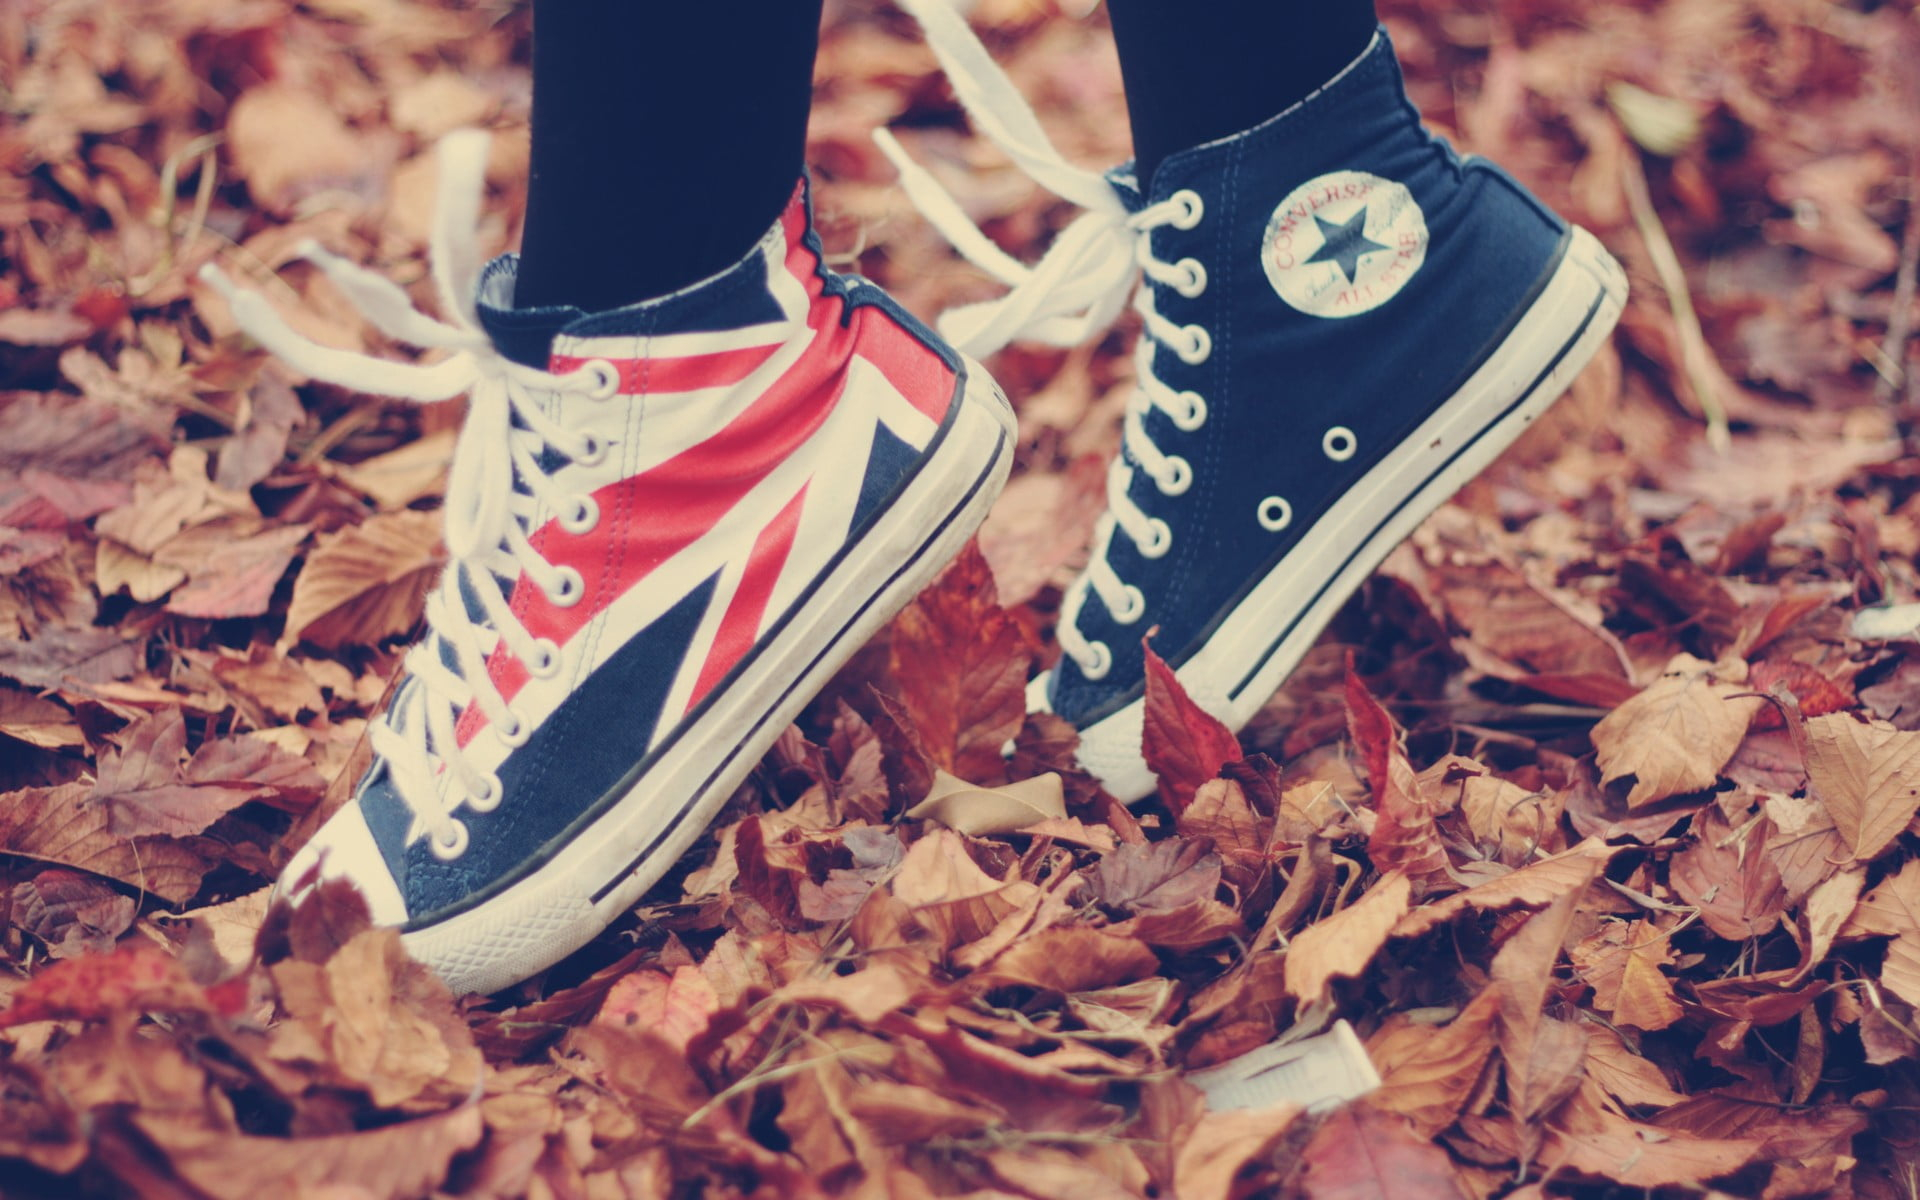 Blue-and-red Converse All-Star high-top sneakers wallpaper, fall